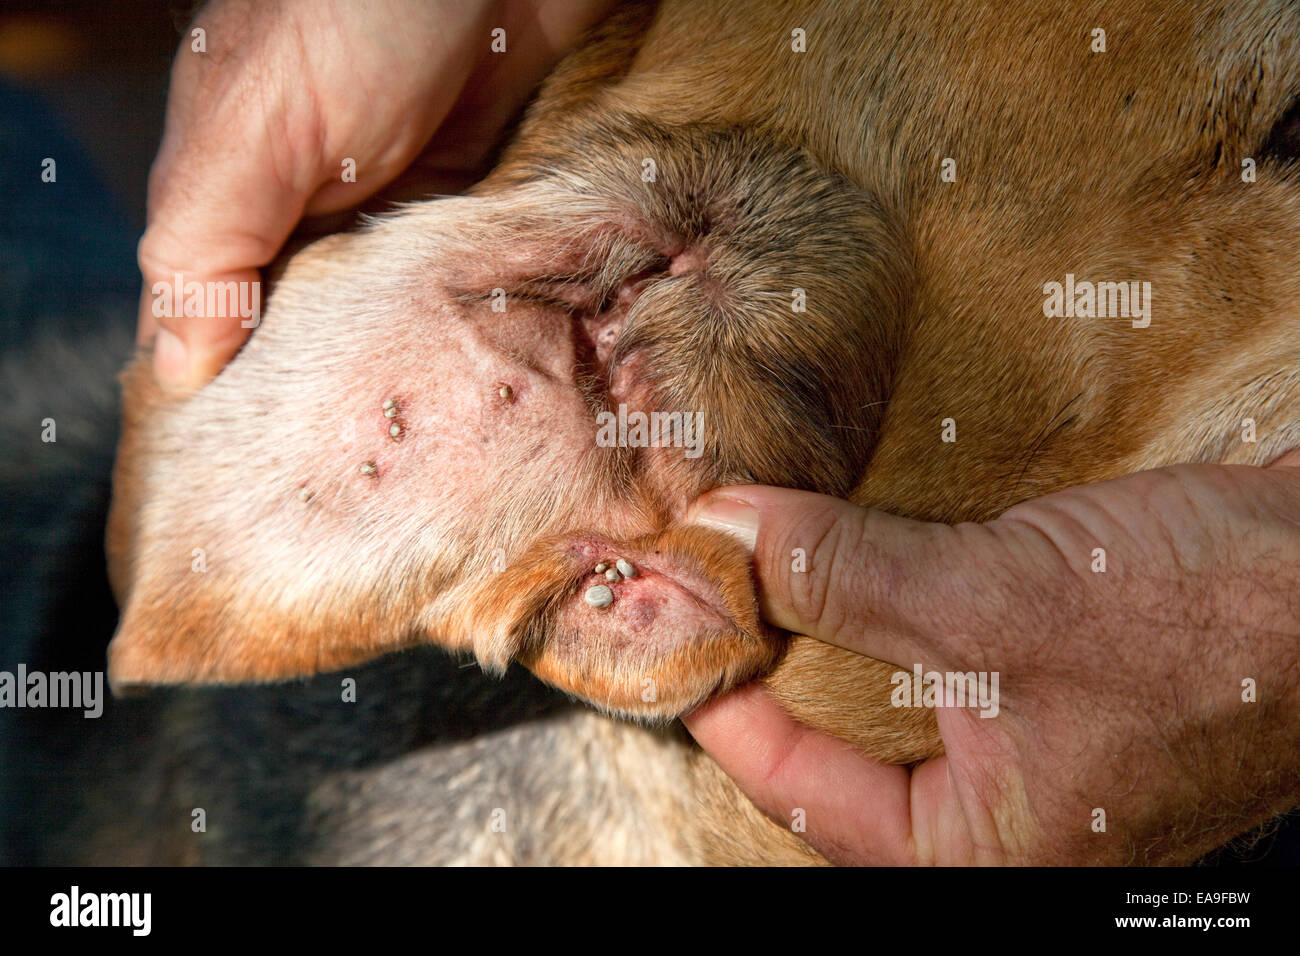 Summerland Serums - Paralysis ticks (Ixodes holocyclus) are grown on the inside of the dogs ears Stock Photo